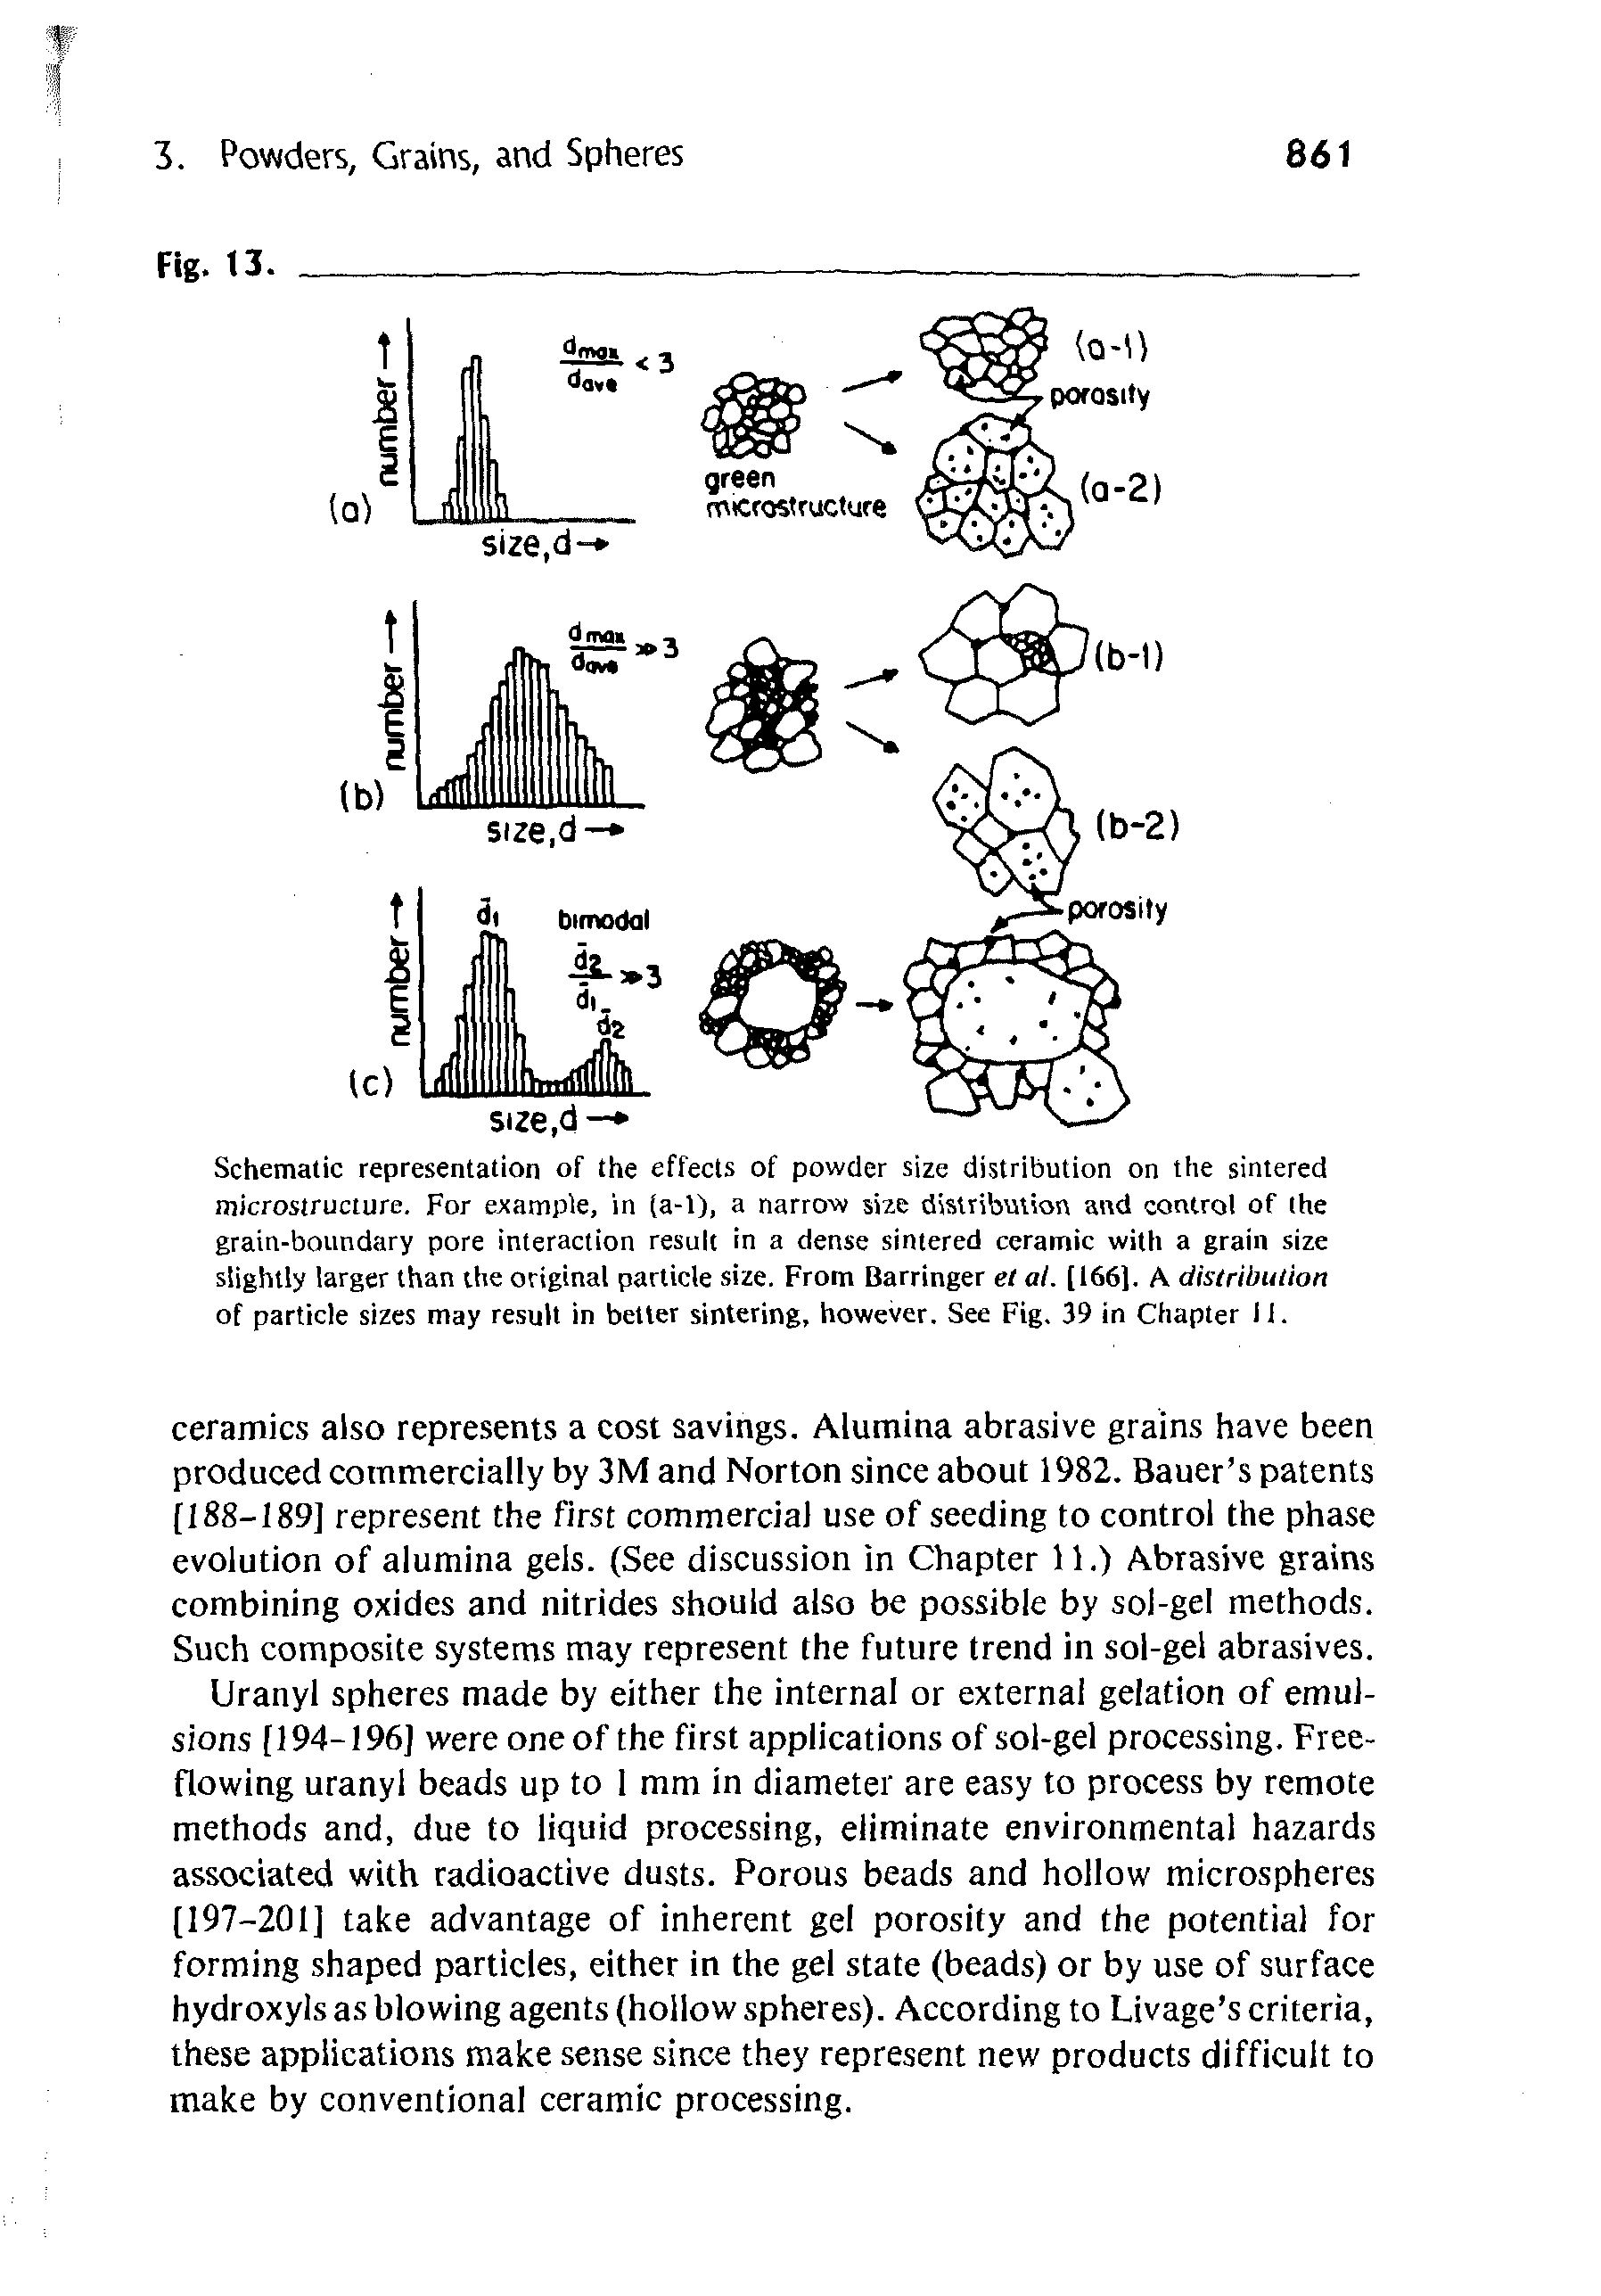 Schematic representation of the effects of powder size distribution on the sintered microstructure. For eJtample, in (a-1), a narrow size distribution and ooturol of the grain-boundary pore interaction result in a dense sintered ceramic with a grain size slightly larger than the original particle size. From Barringer el at. [166). A distribution of particle sizes may result in better sintering, however. See Fig, 39 in Chapter II.